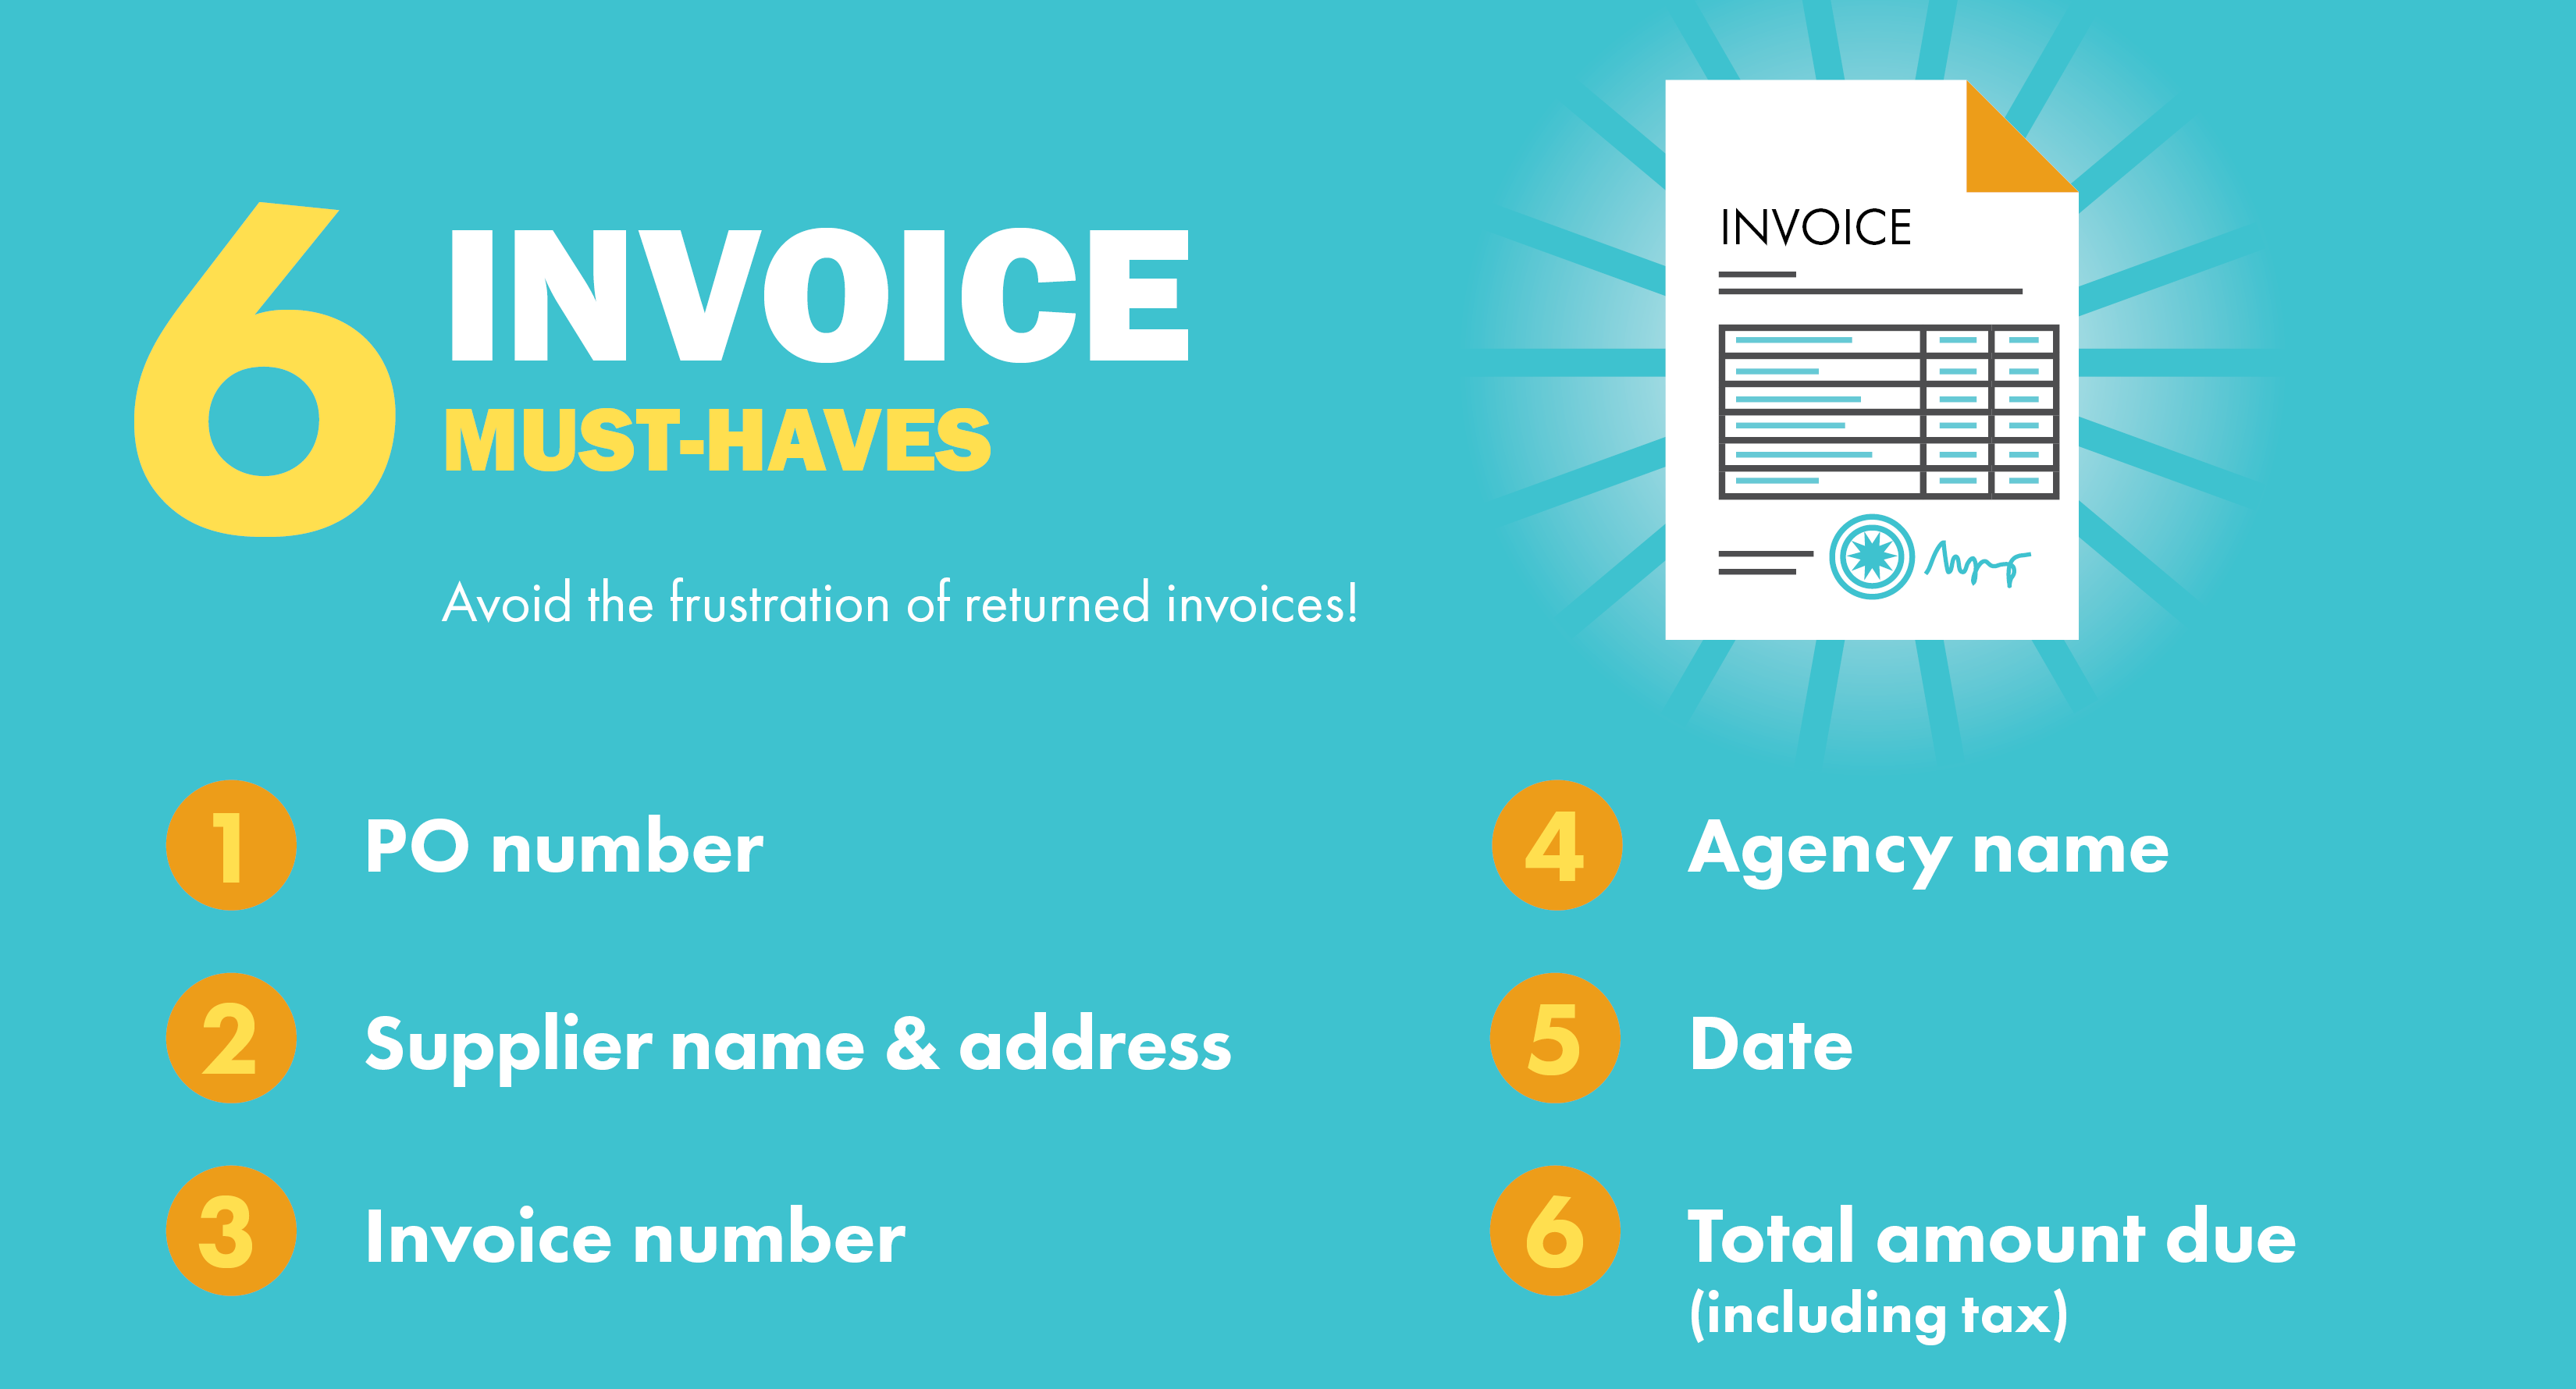 Invoices_Infographic_Blue